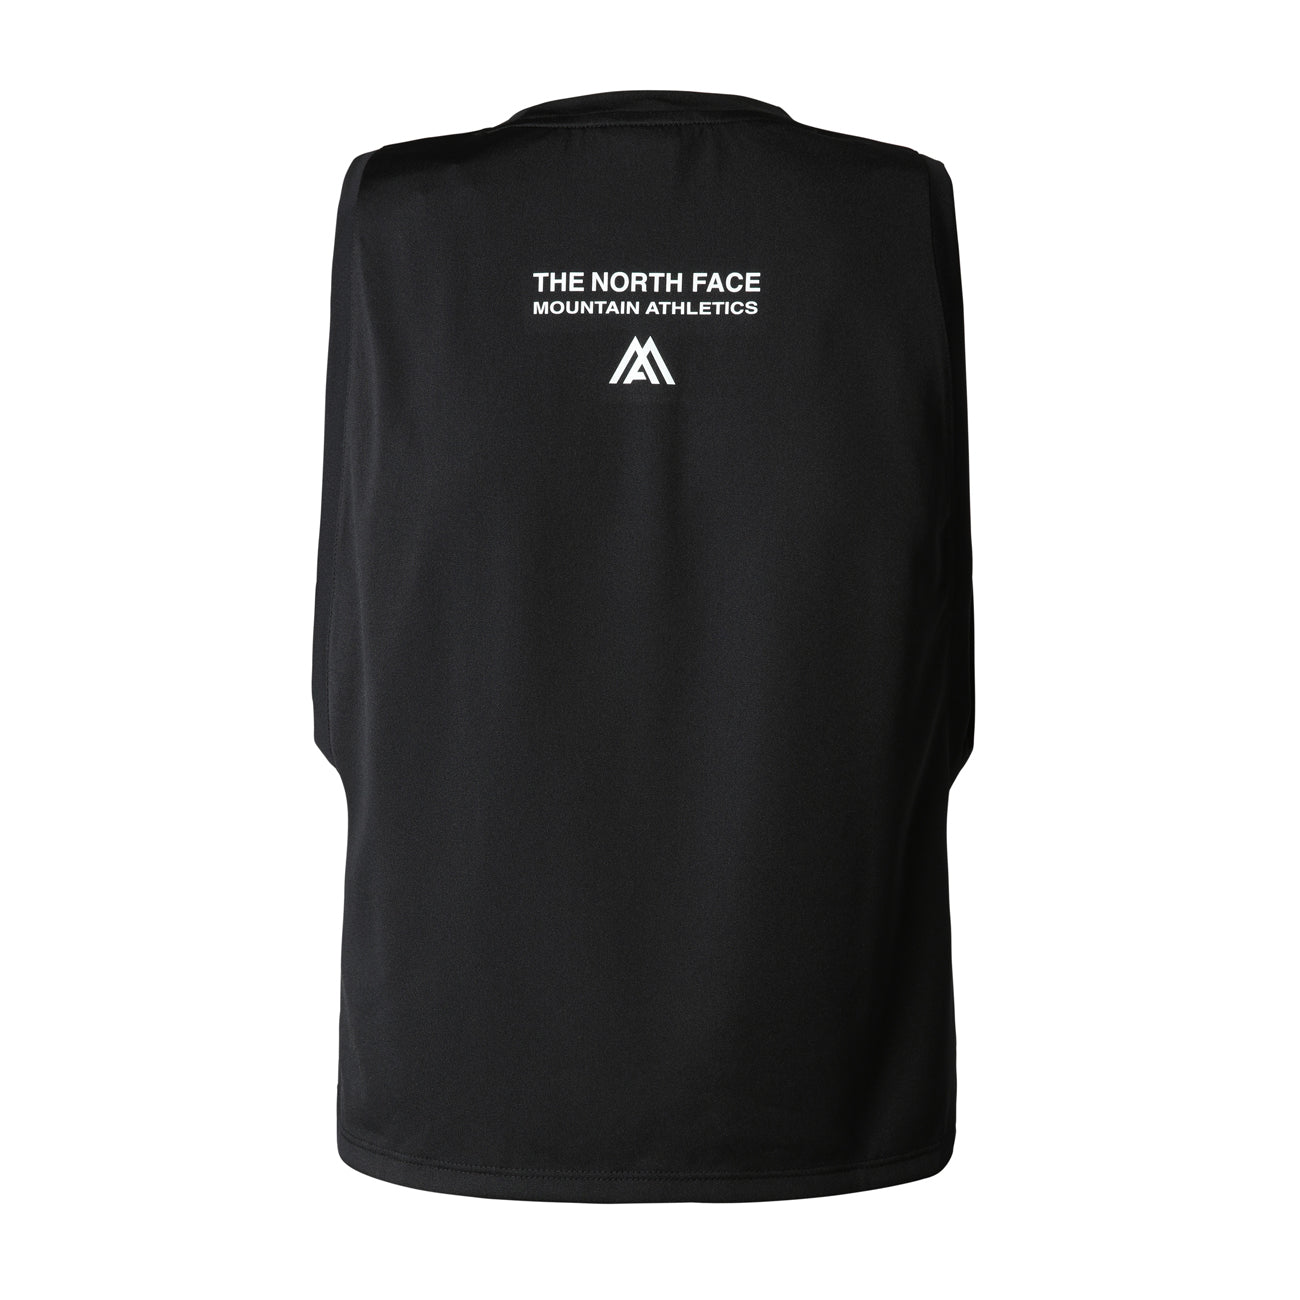 The North Face W Mountain Athletics S/S Cropped Tank Top Damen TNF Black